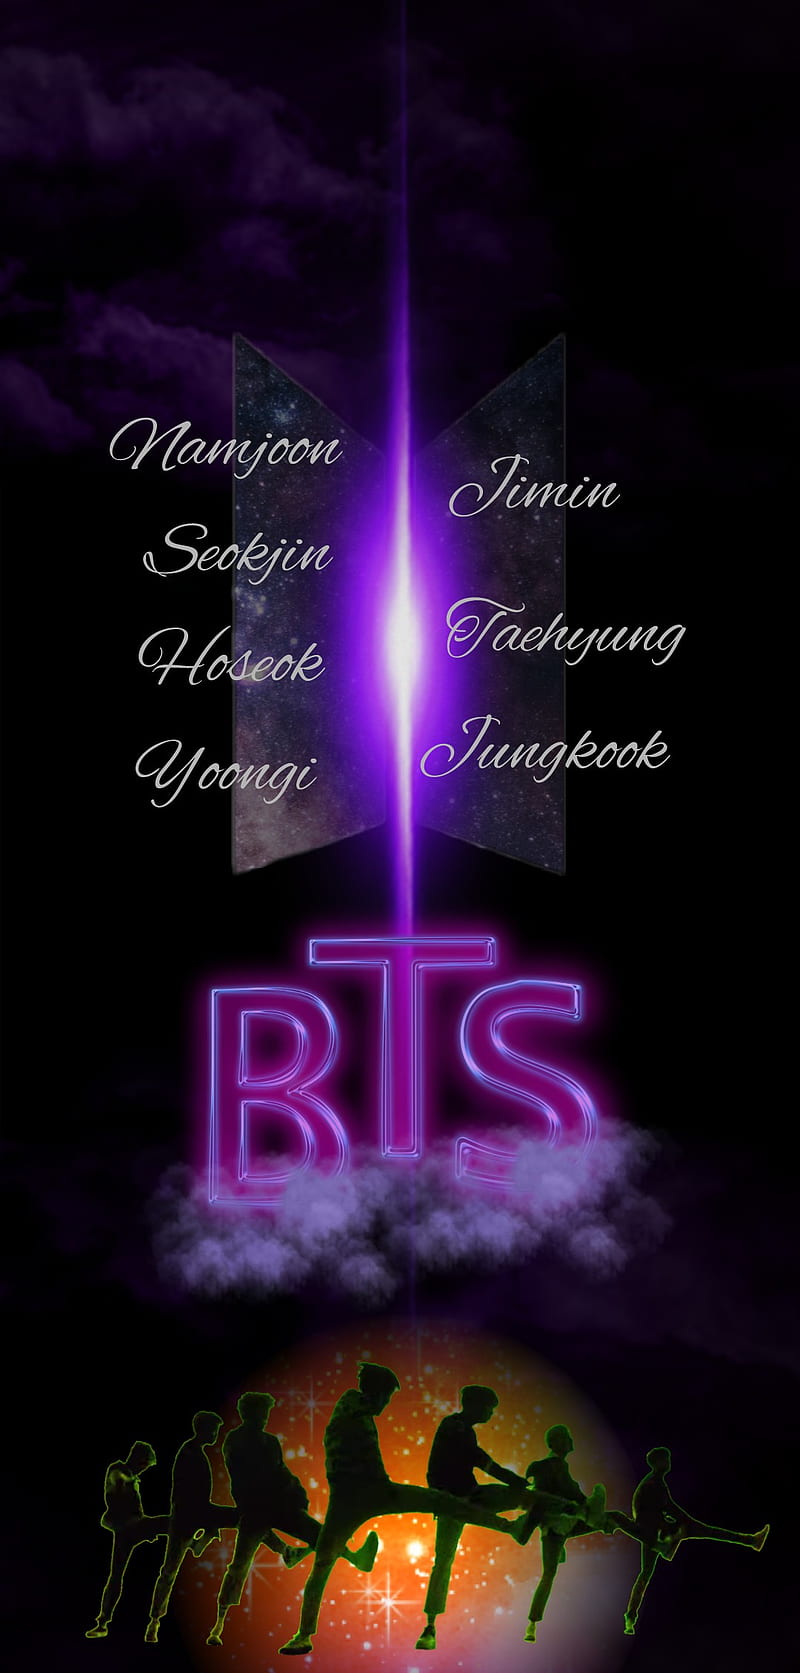 BTS wallpaper I made for my phone - Dance